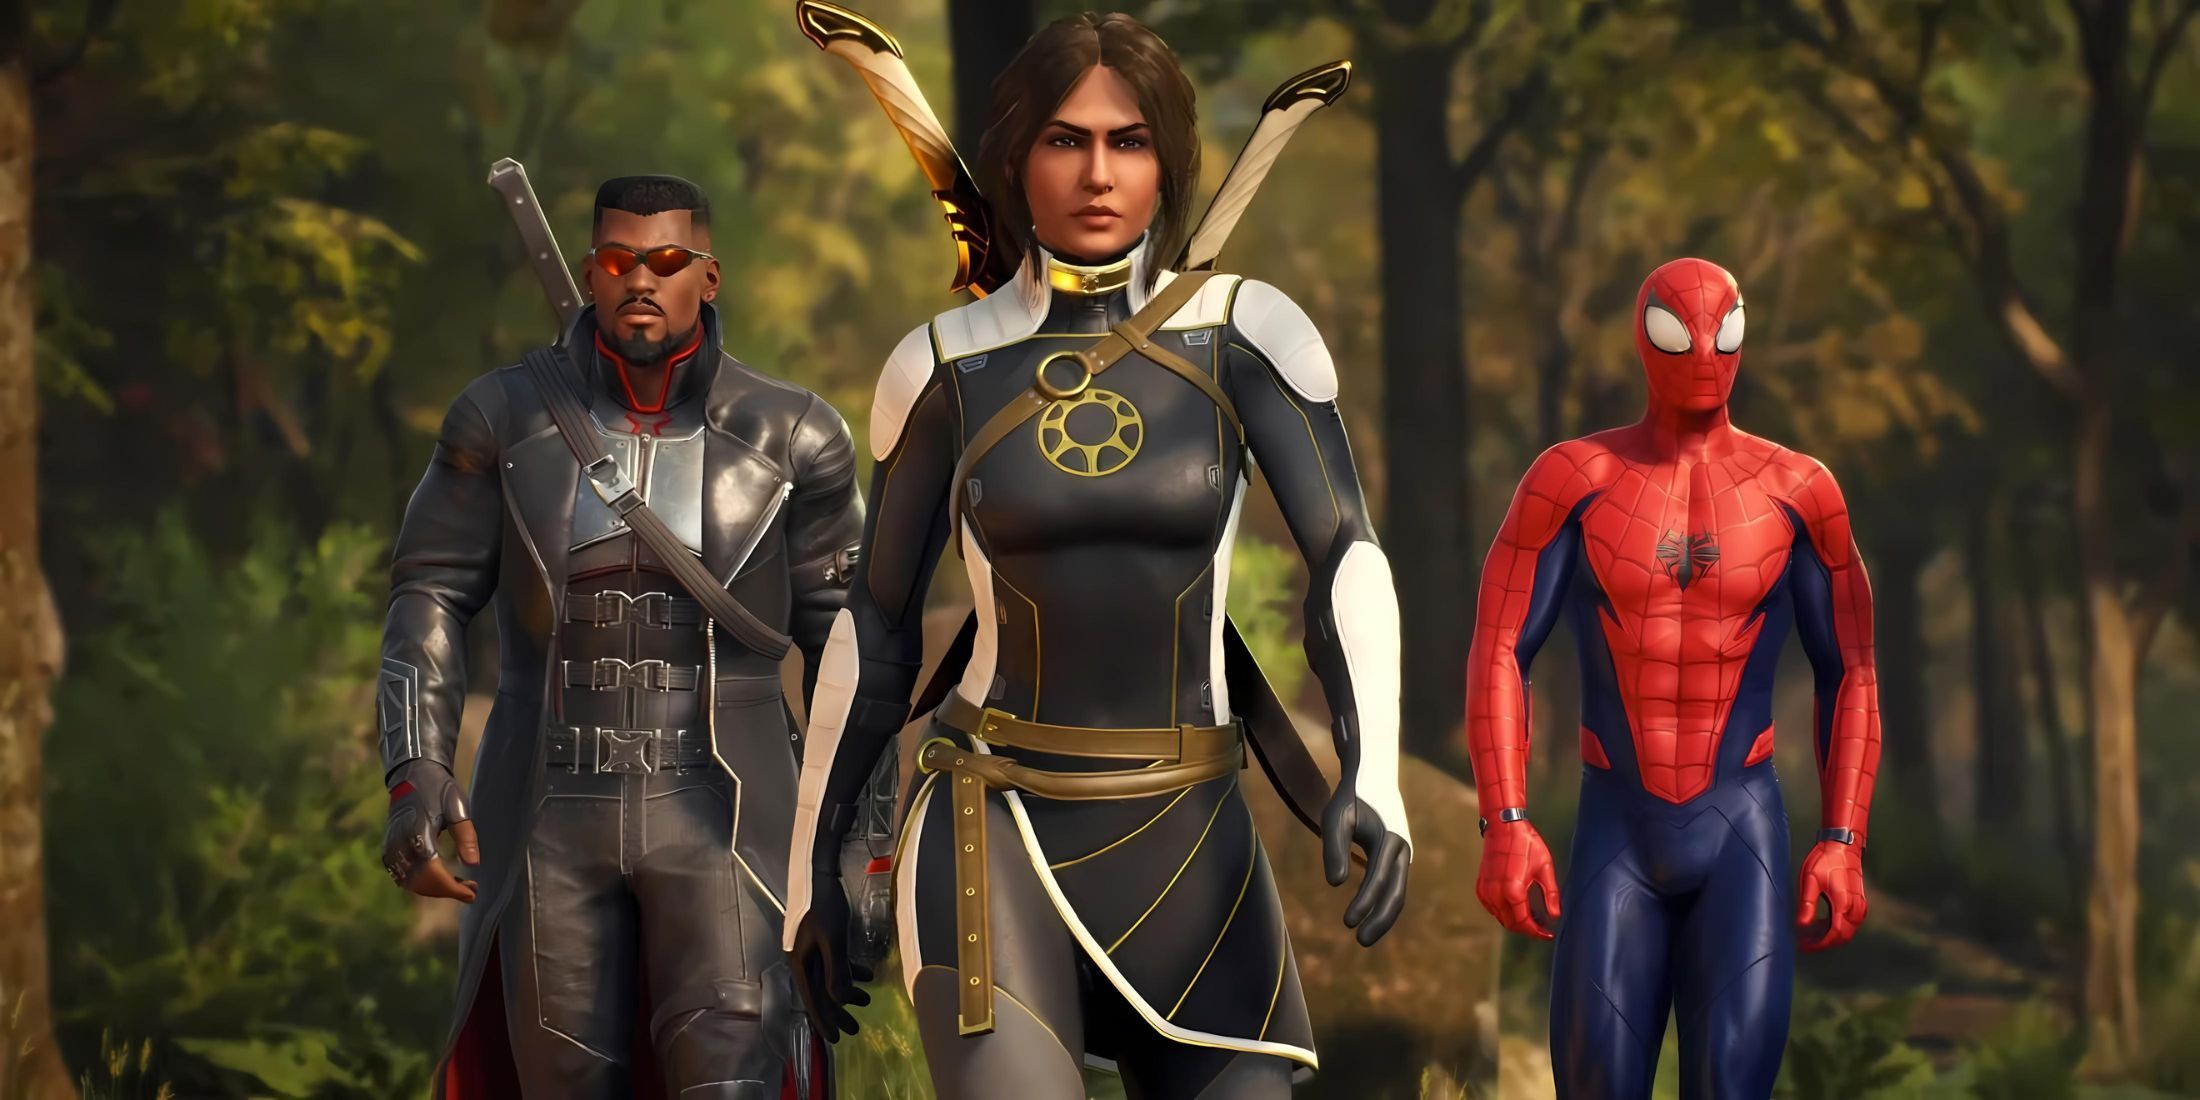 Blade and Spider-Man walking alongside a Midnight Suns player